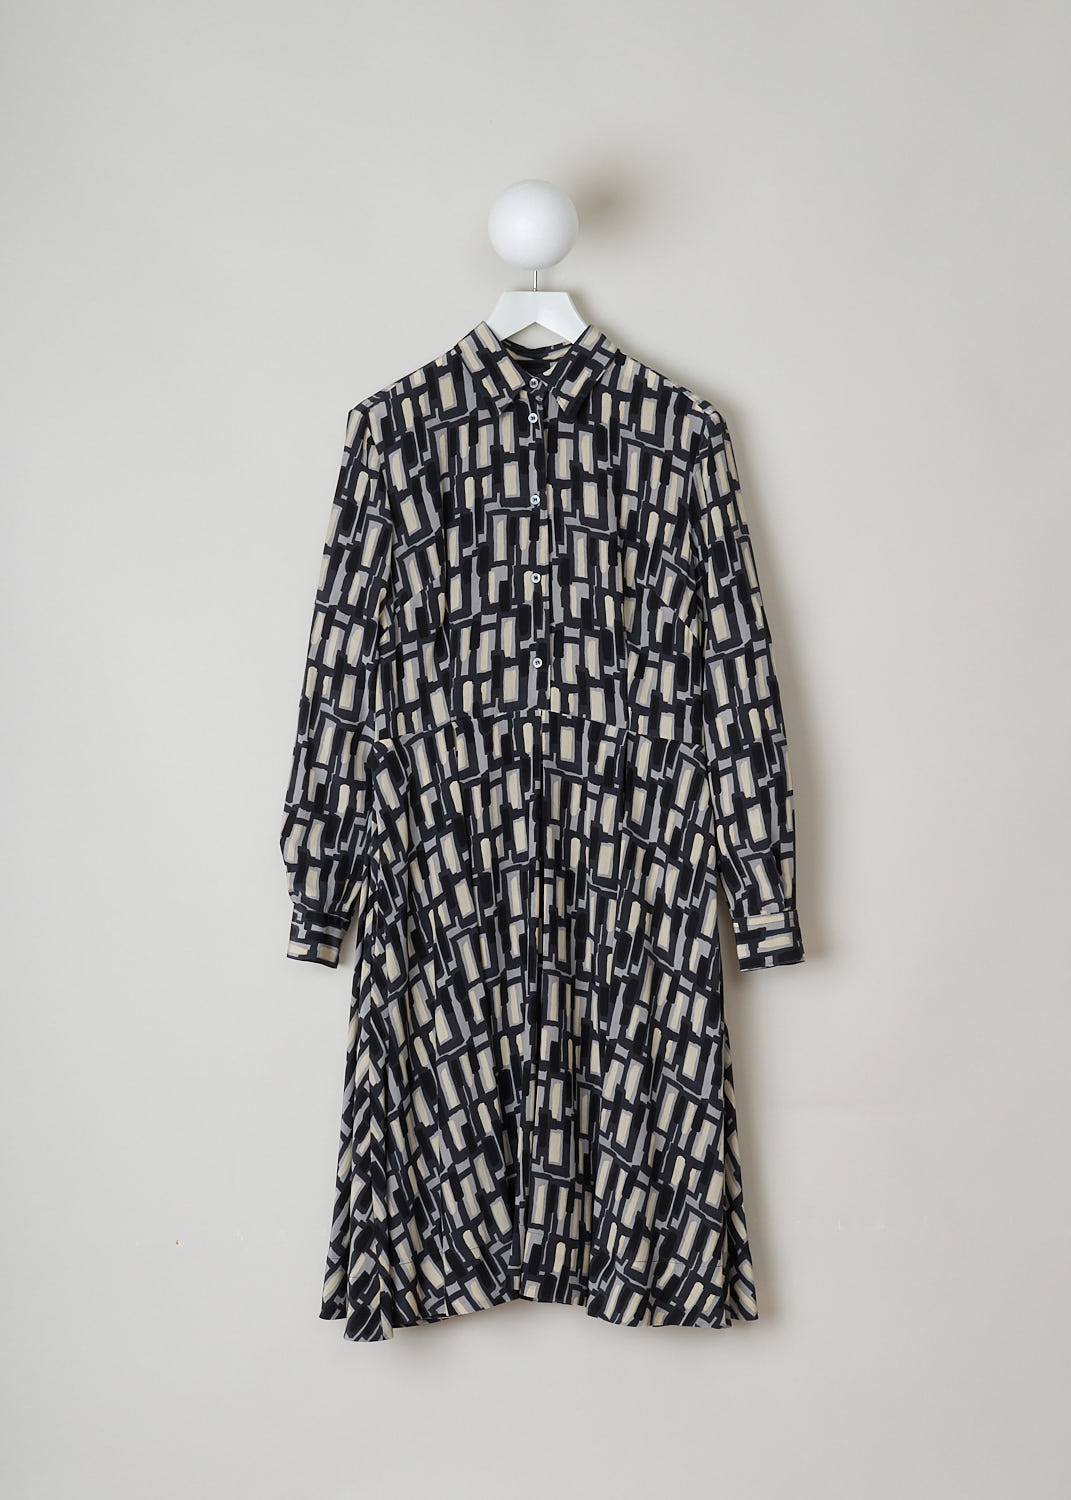 ASPESI, SILK PRINTED MIDI DRESS, 2938_V126_66173, Print, Front, This long sleeve dress has a geometric print in black, grey and off-white hues. The dress features a pointed collar, a row of button up to the waistband, concealed slanted pockets and a pleated skirt that reaches to below the knee. 

